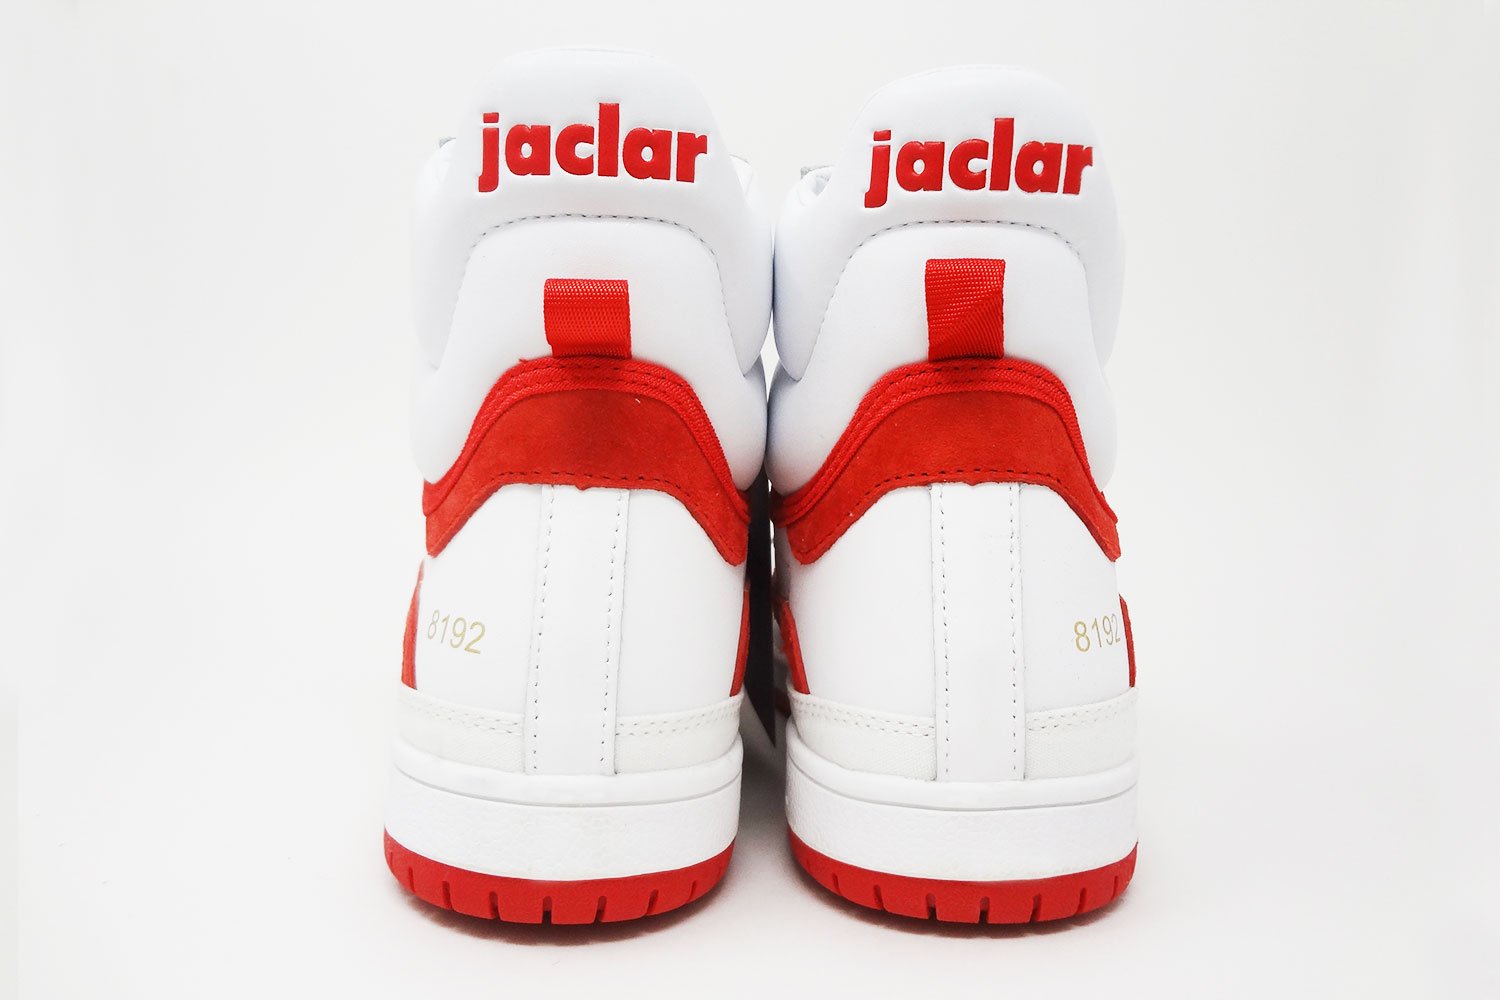 Jaclar The Intimidator Retro Basketball High Top Sneakers rear @ The Deffest